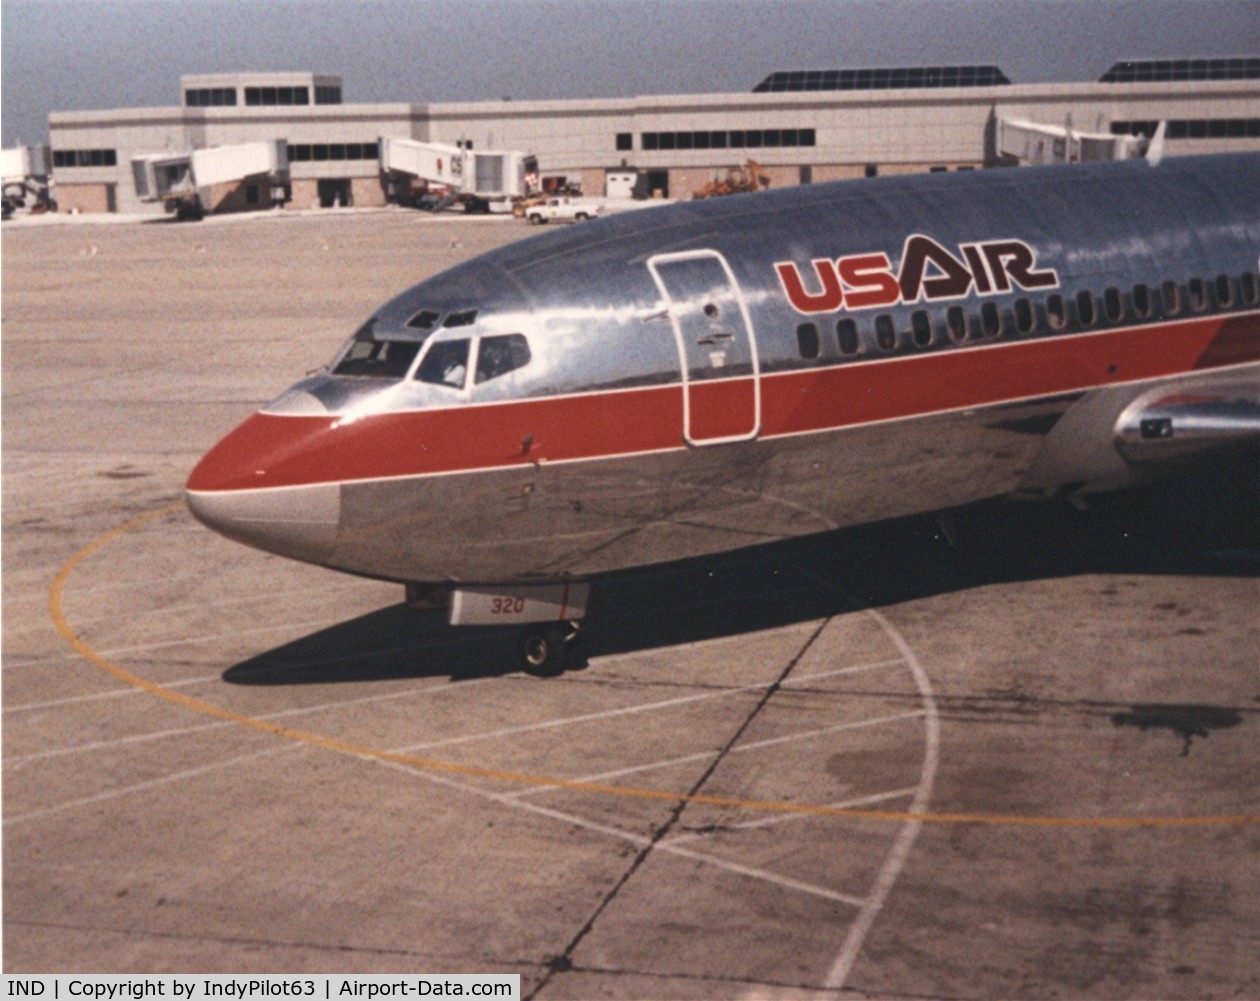 Indianapolis International Airport (IND) - A 737 headed out to Sky Harbor in Phoenix around 1986.